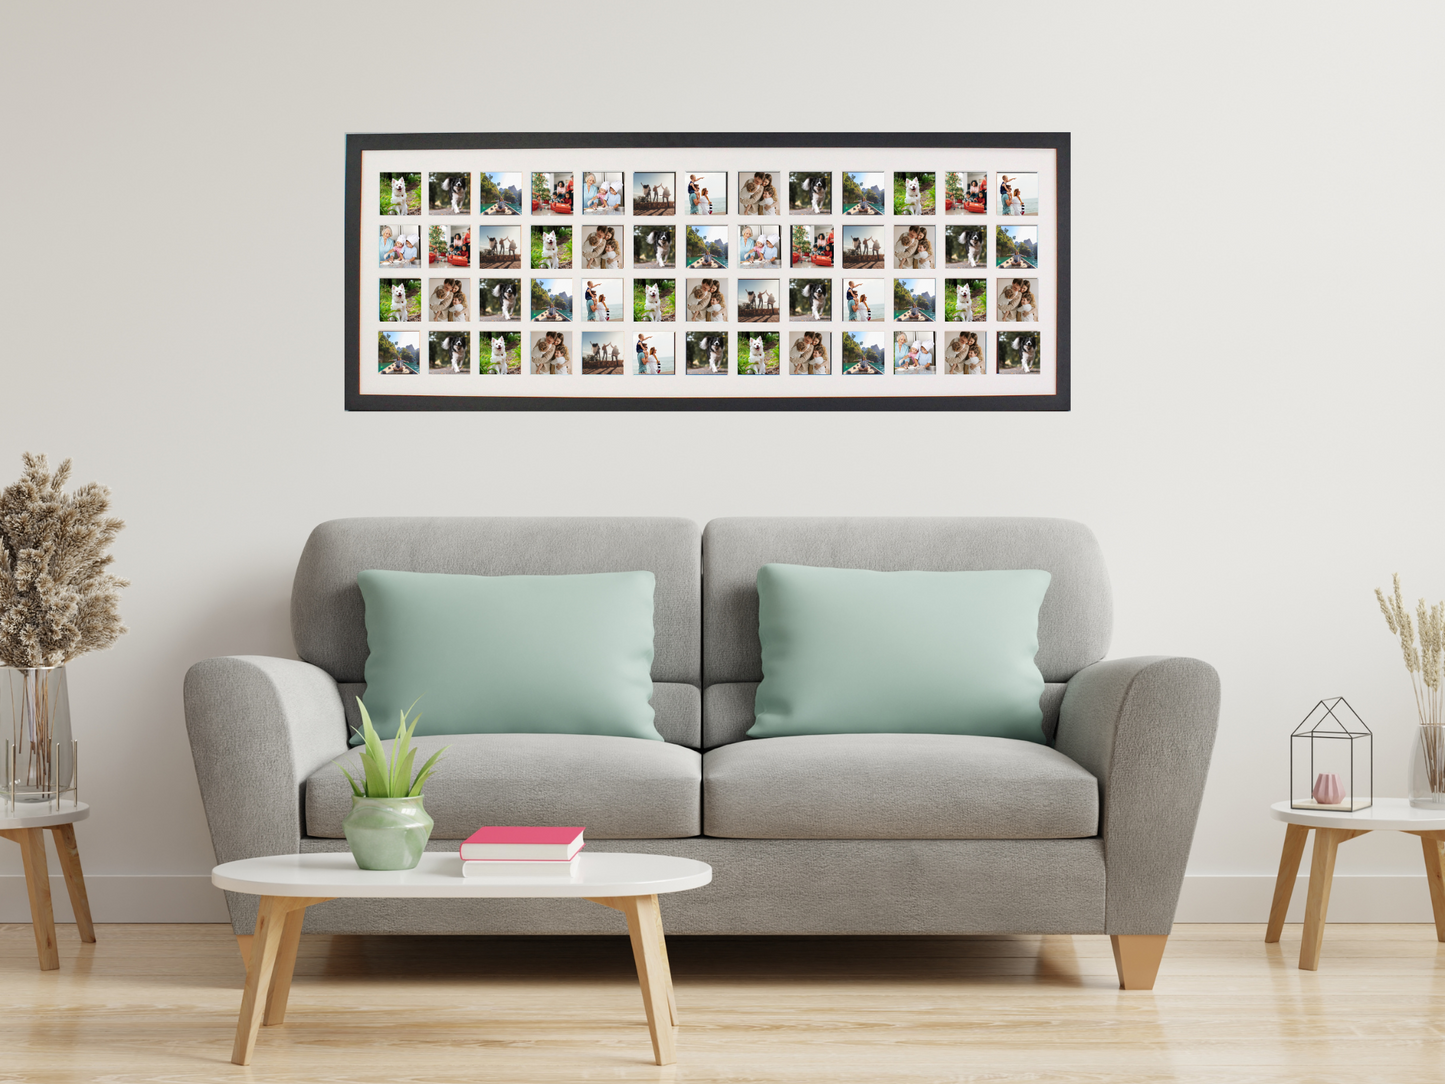 Square Multi Aperture Photo Frame. Capture a photo every week for a year! Suits 52 2.5x2.5inch Photos. 35x100